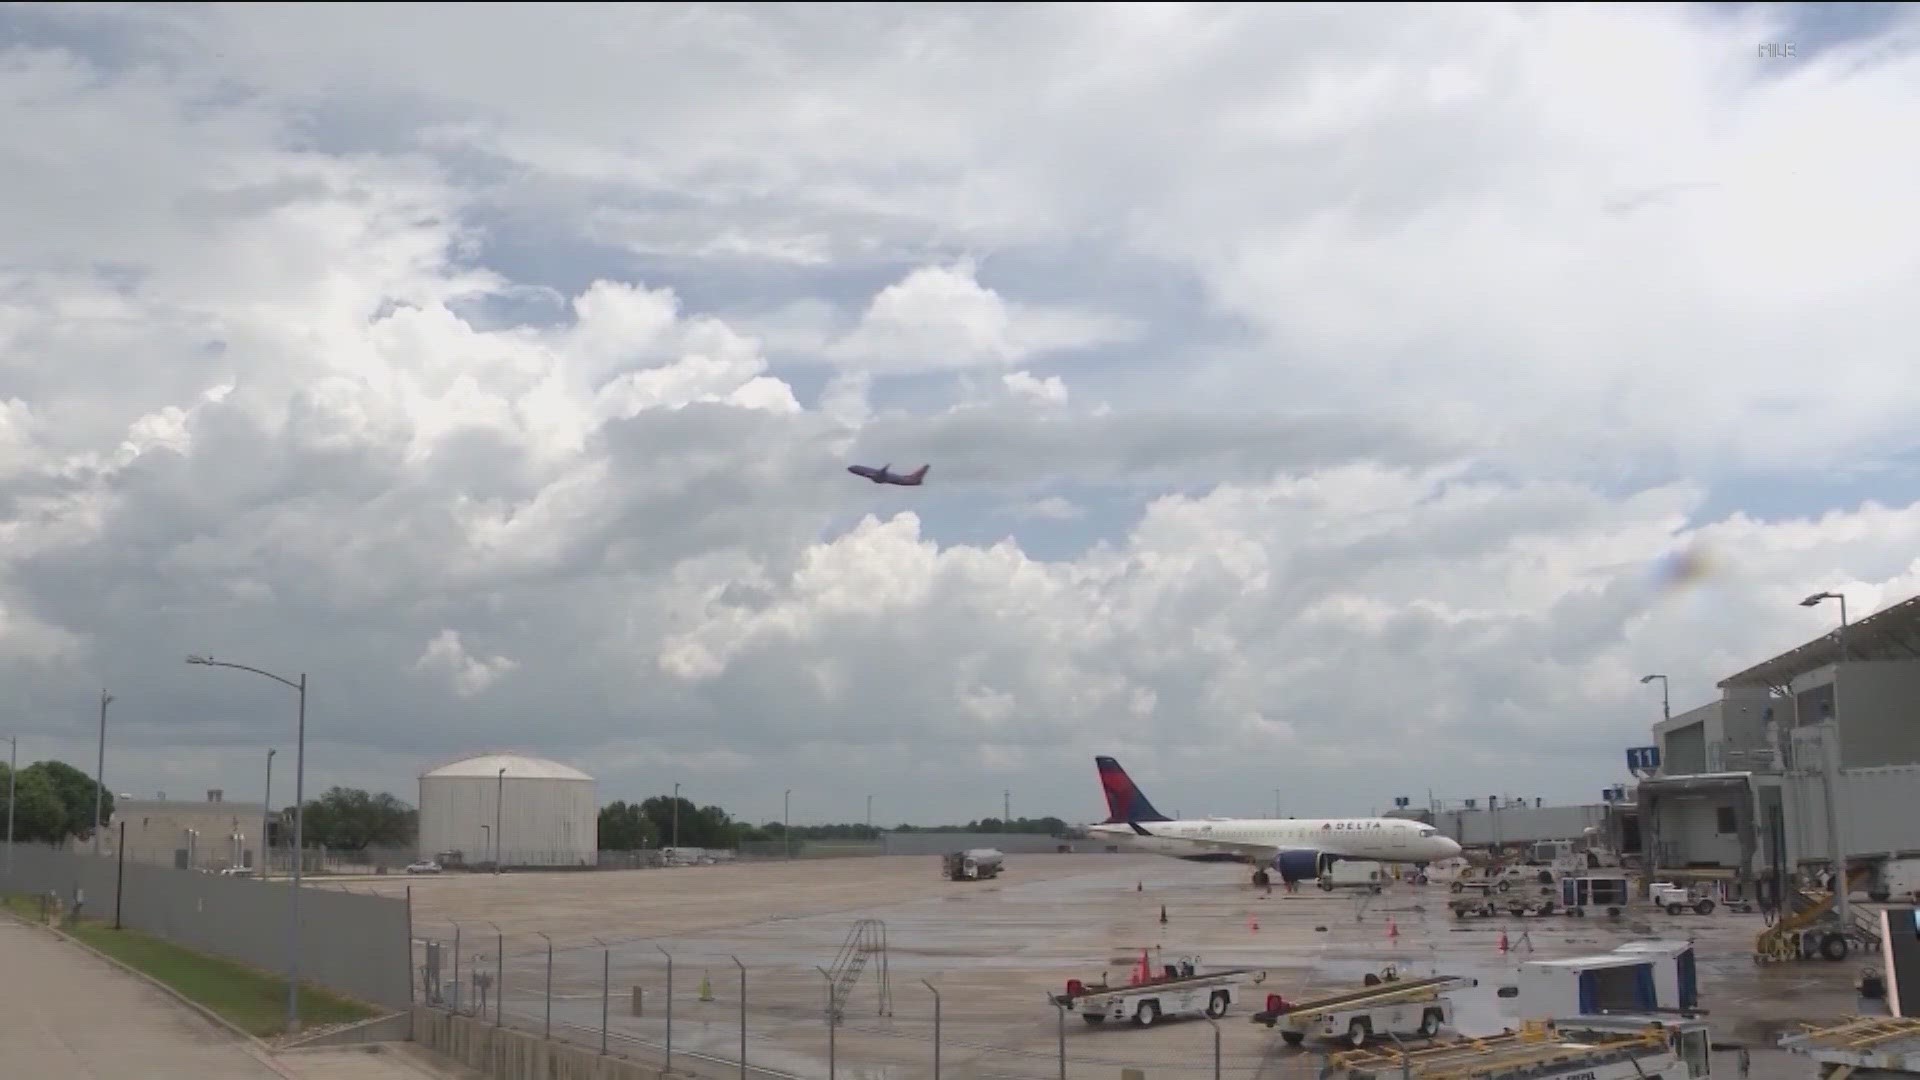 Air travelers trying to fly into Austin's airport ran into some trouble on Monday morning.